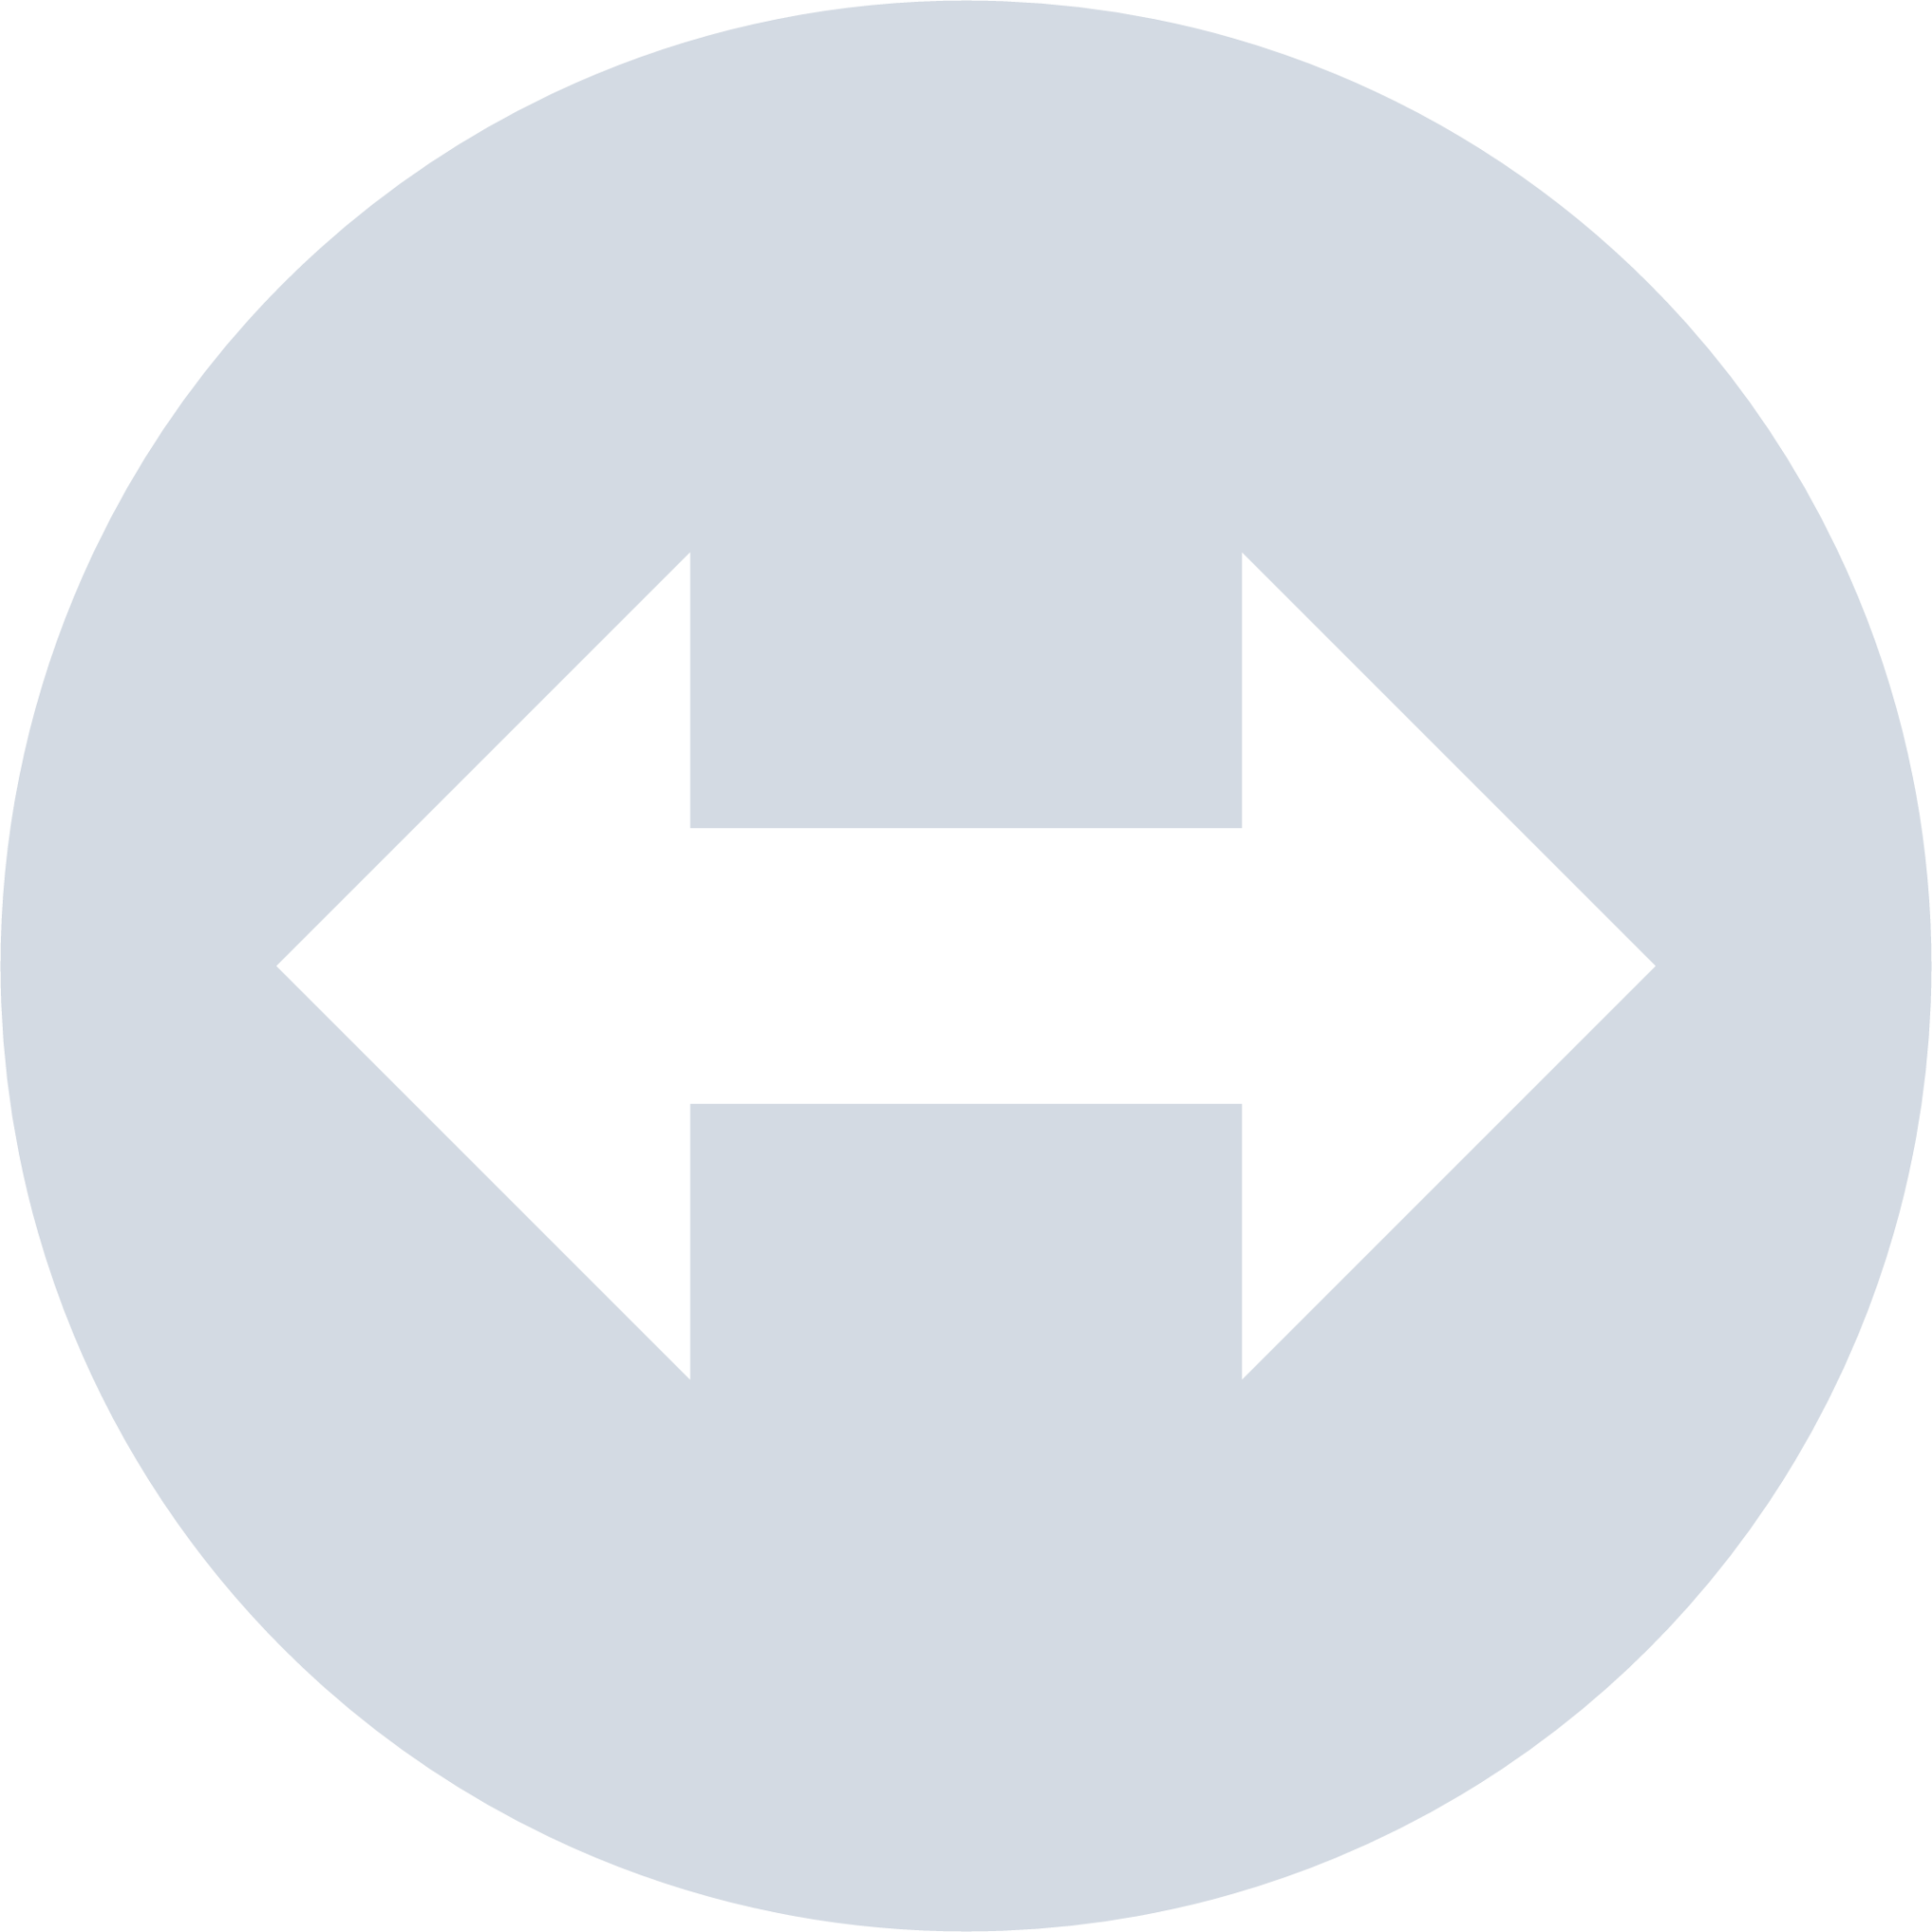 teamviewer indicator icon